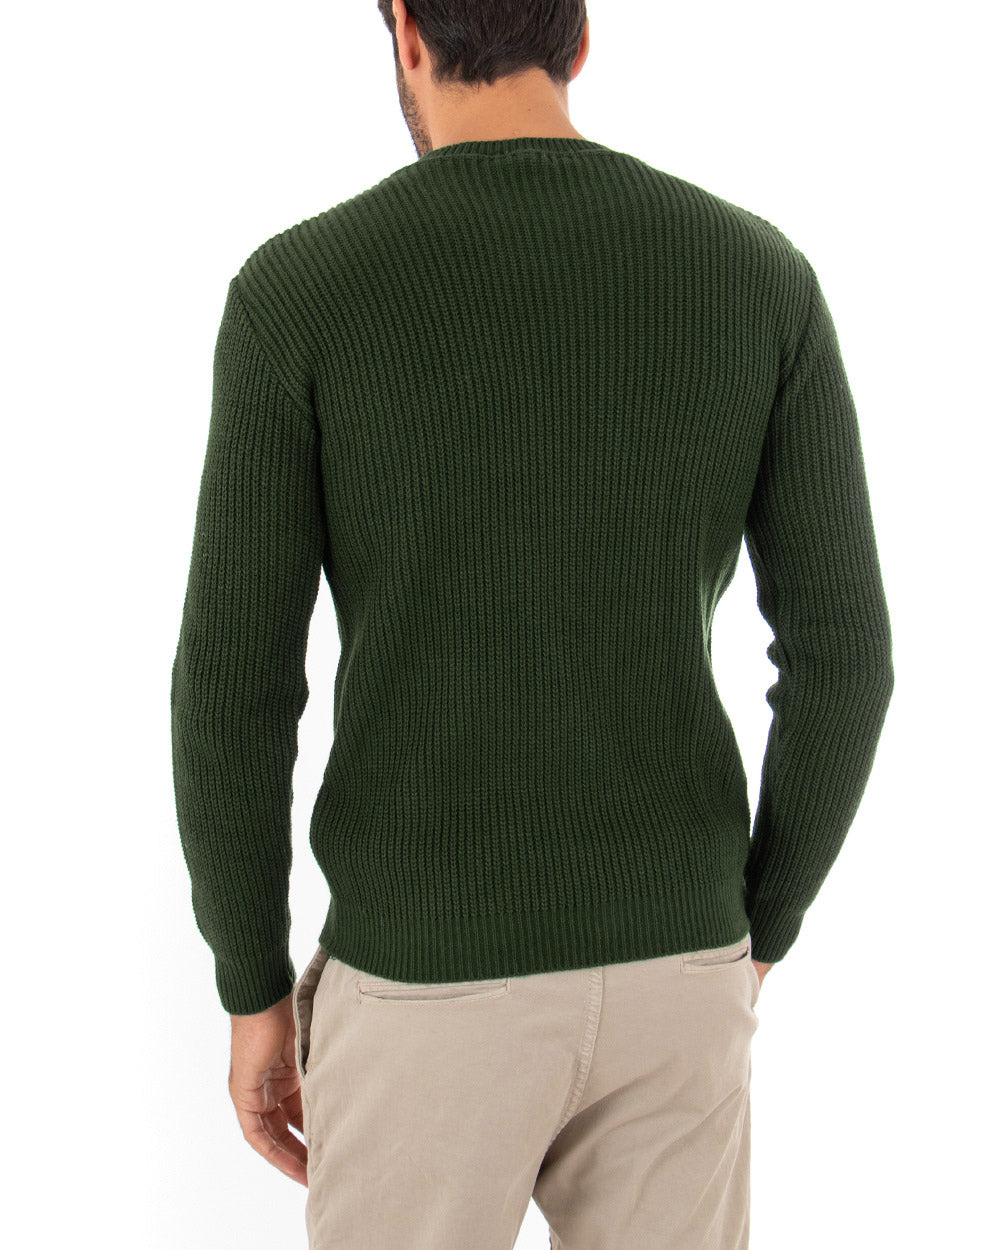 Paul Barrell Men's Pullover Sweater Solid Color Military Green Round Neck Casual GIOSAL-M2601A